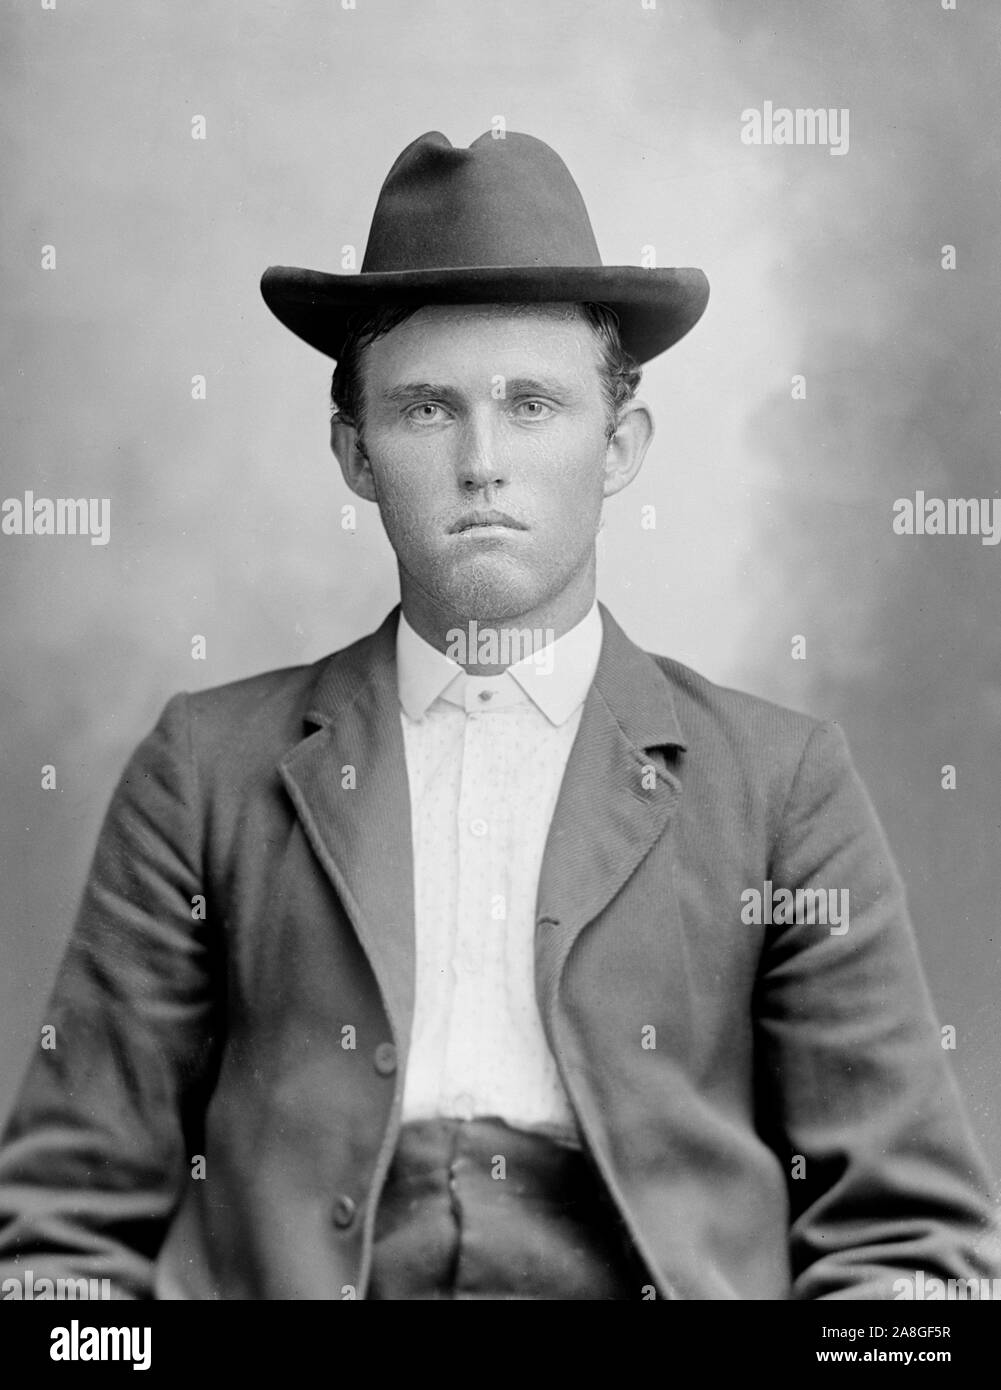 Turn of the 20th century commercial portrait from Gainesville, Georgia, ca. 1901. Stock Photo